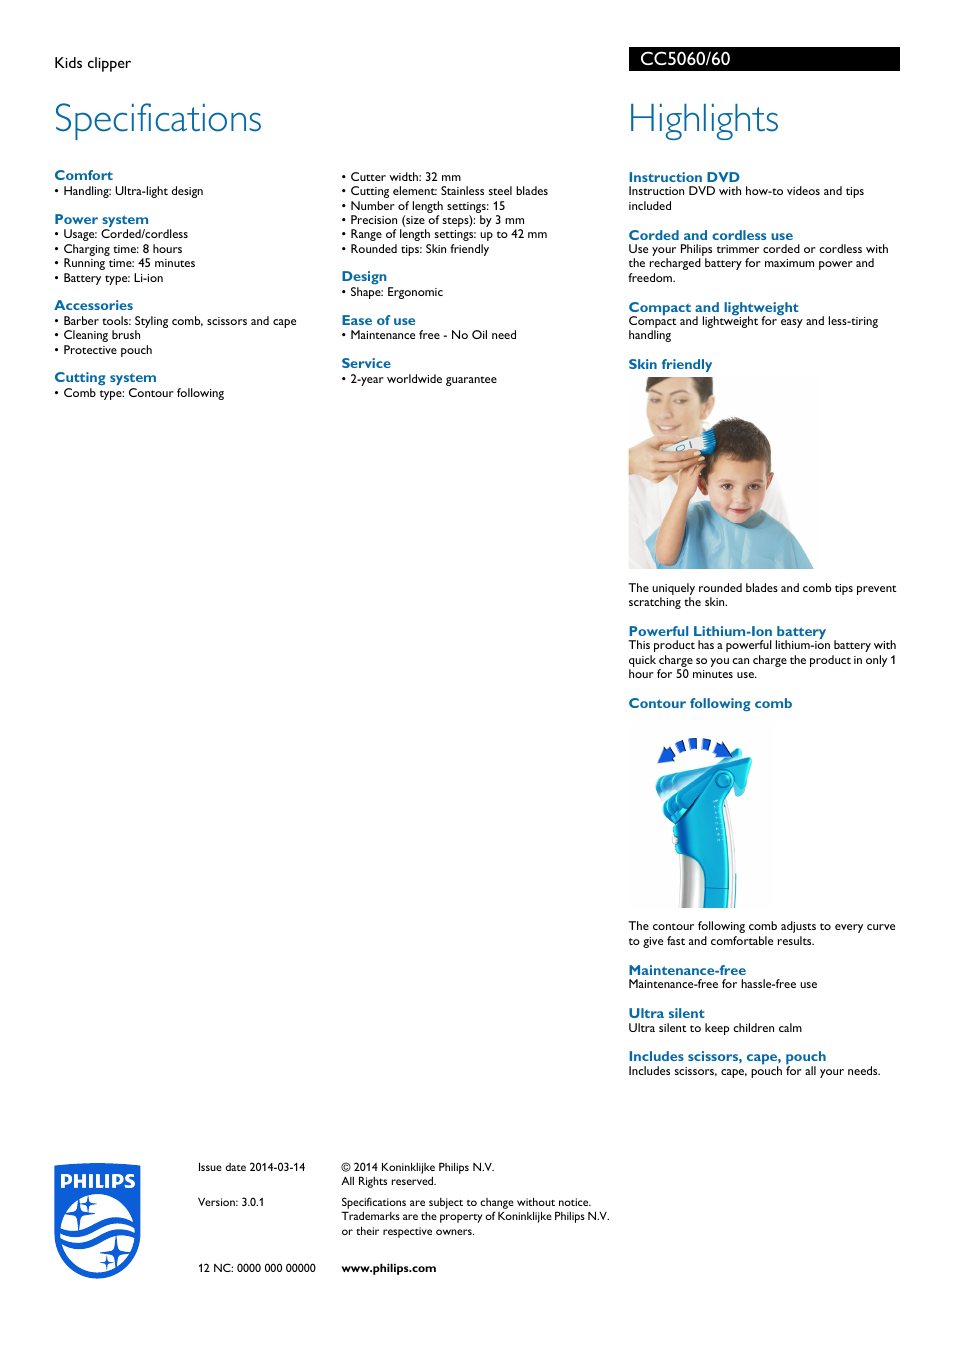 Specifications, Highlights | Philips CC5060-60 User Manual | Page 2 / 2